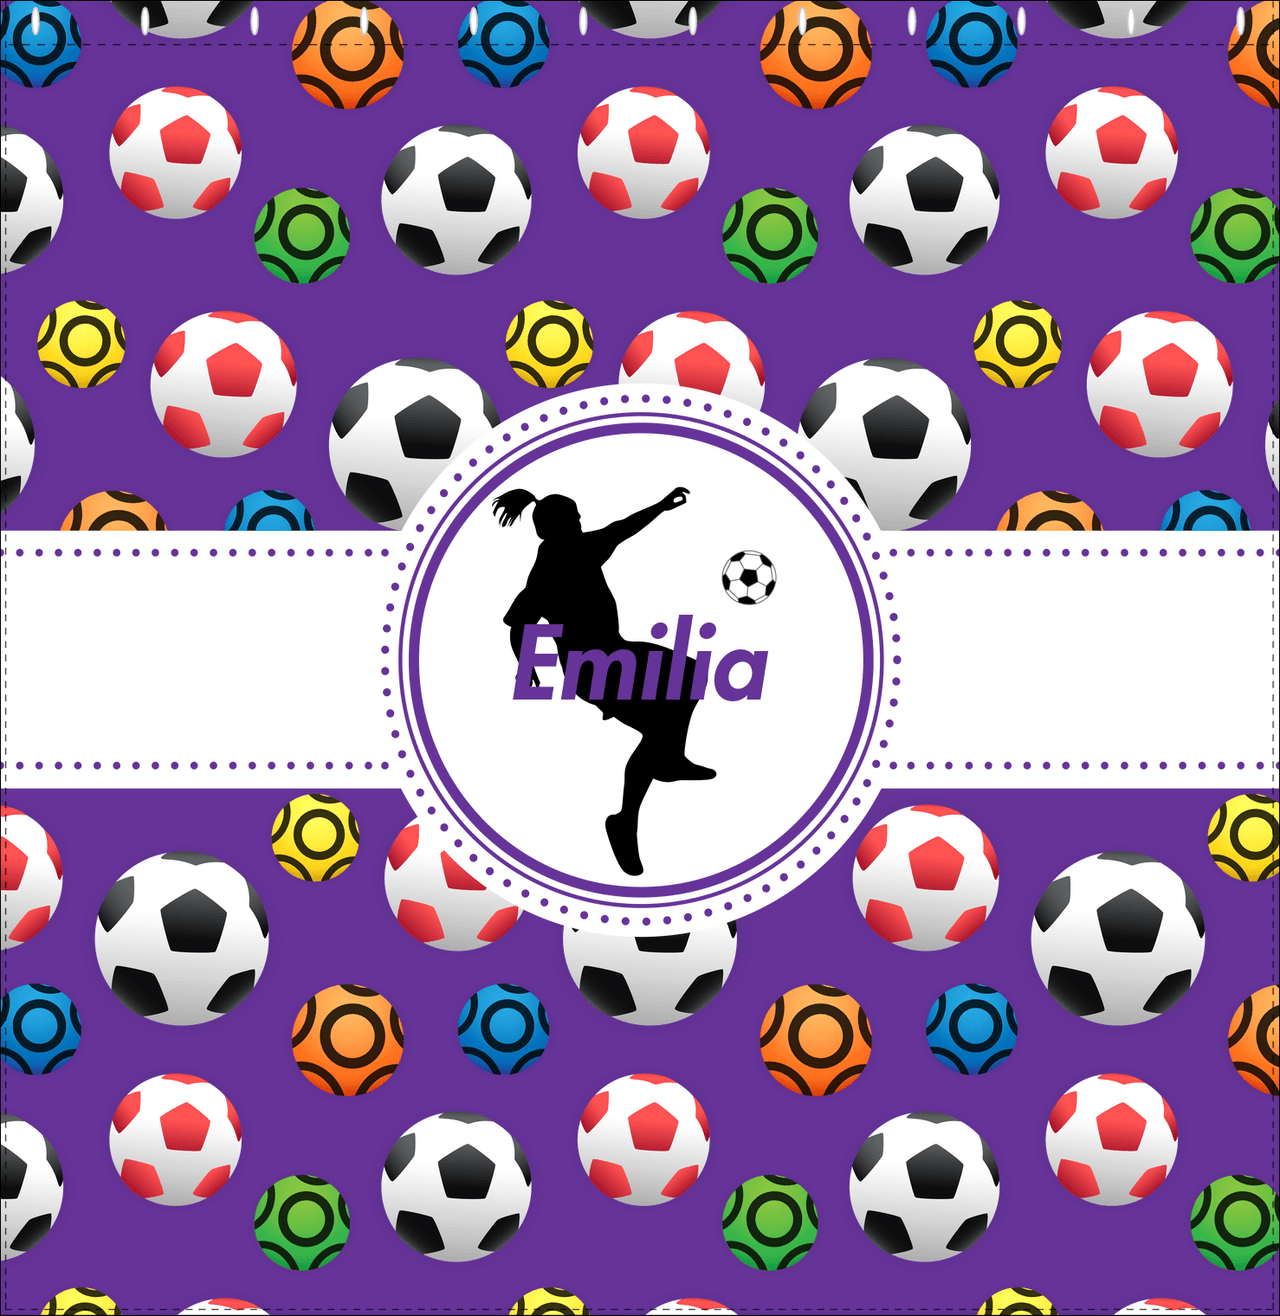 Personalized Soccer Shower Curtain XLVIII - Purple Background - Girl Silhouette II - Decorate View